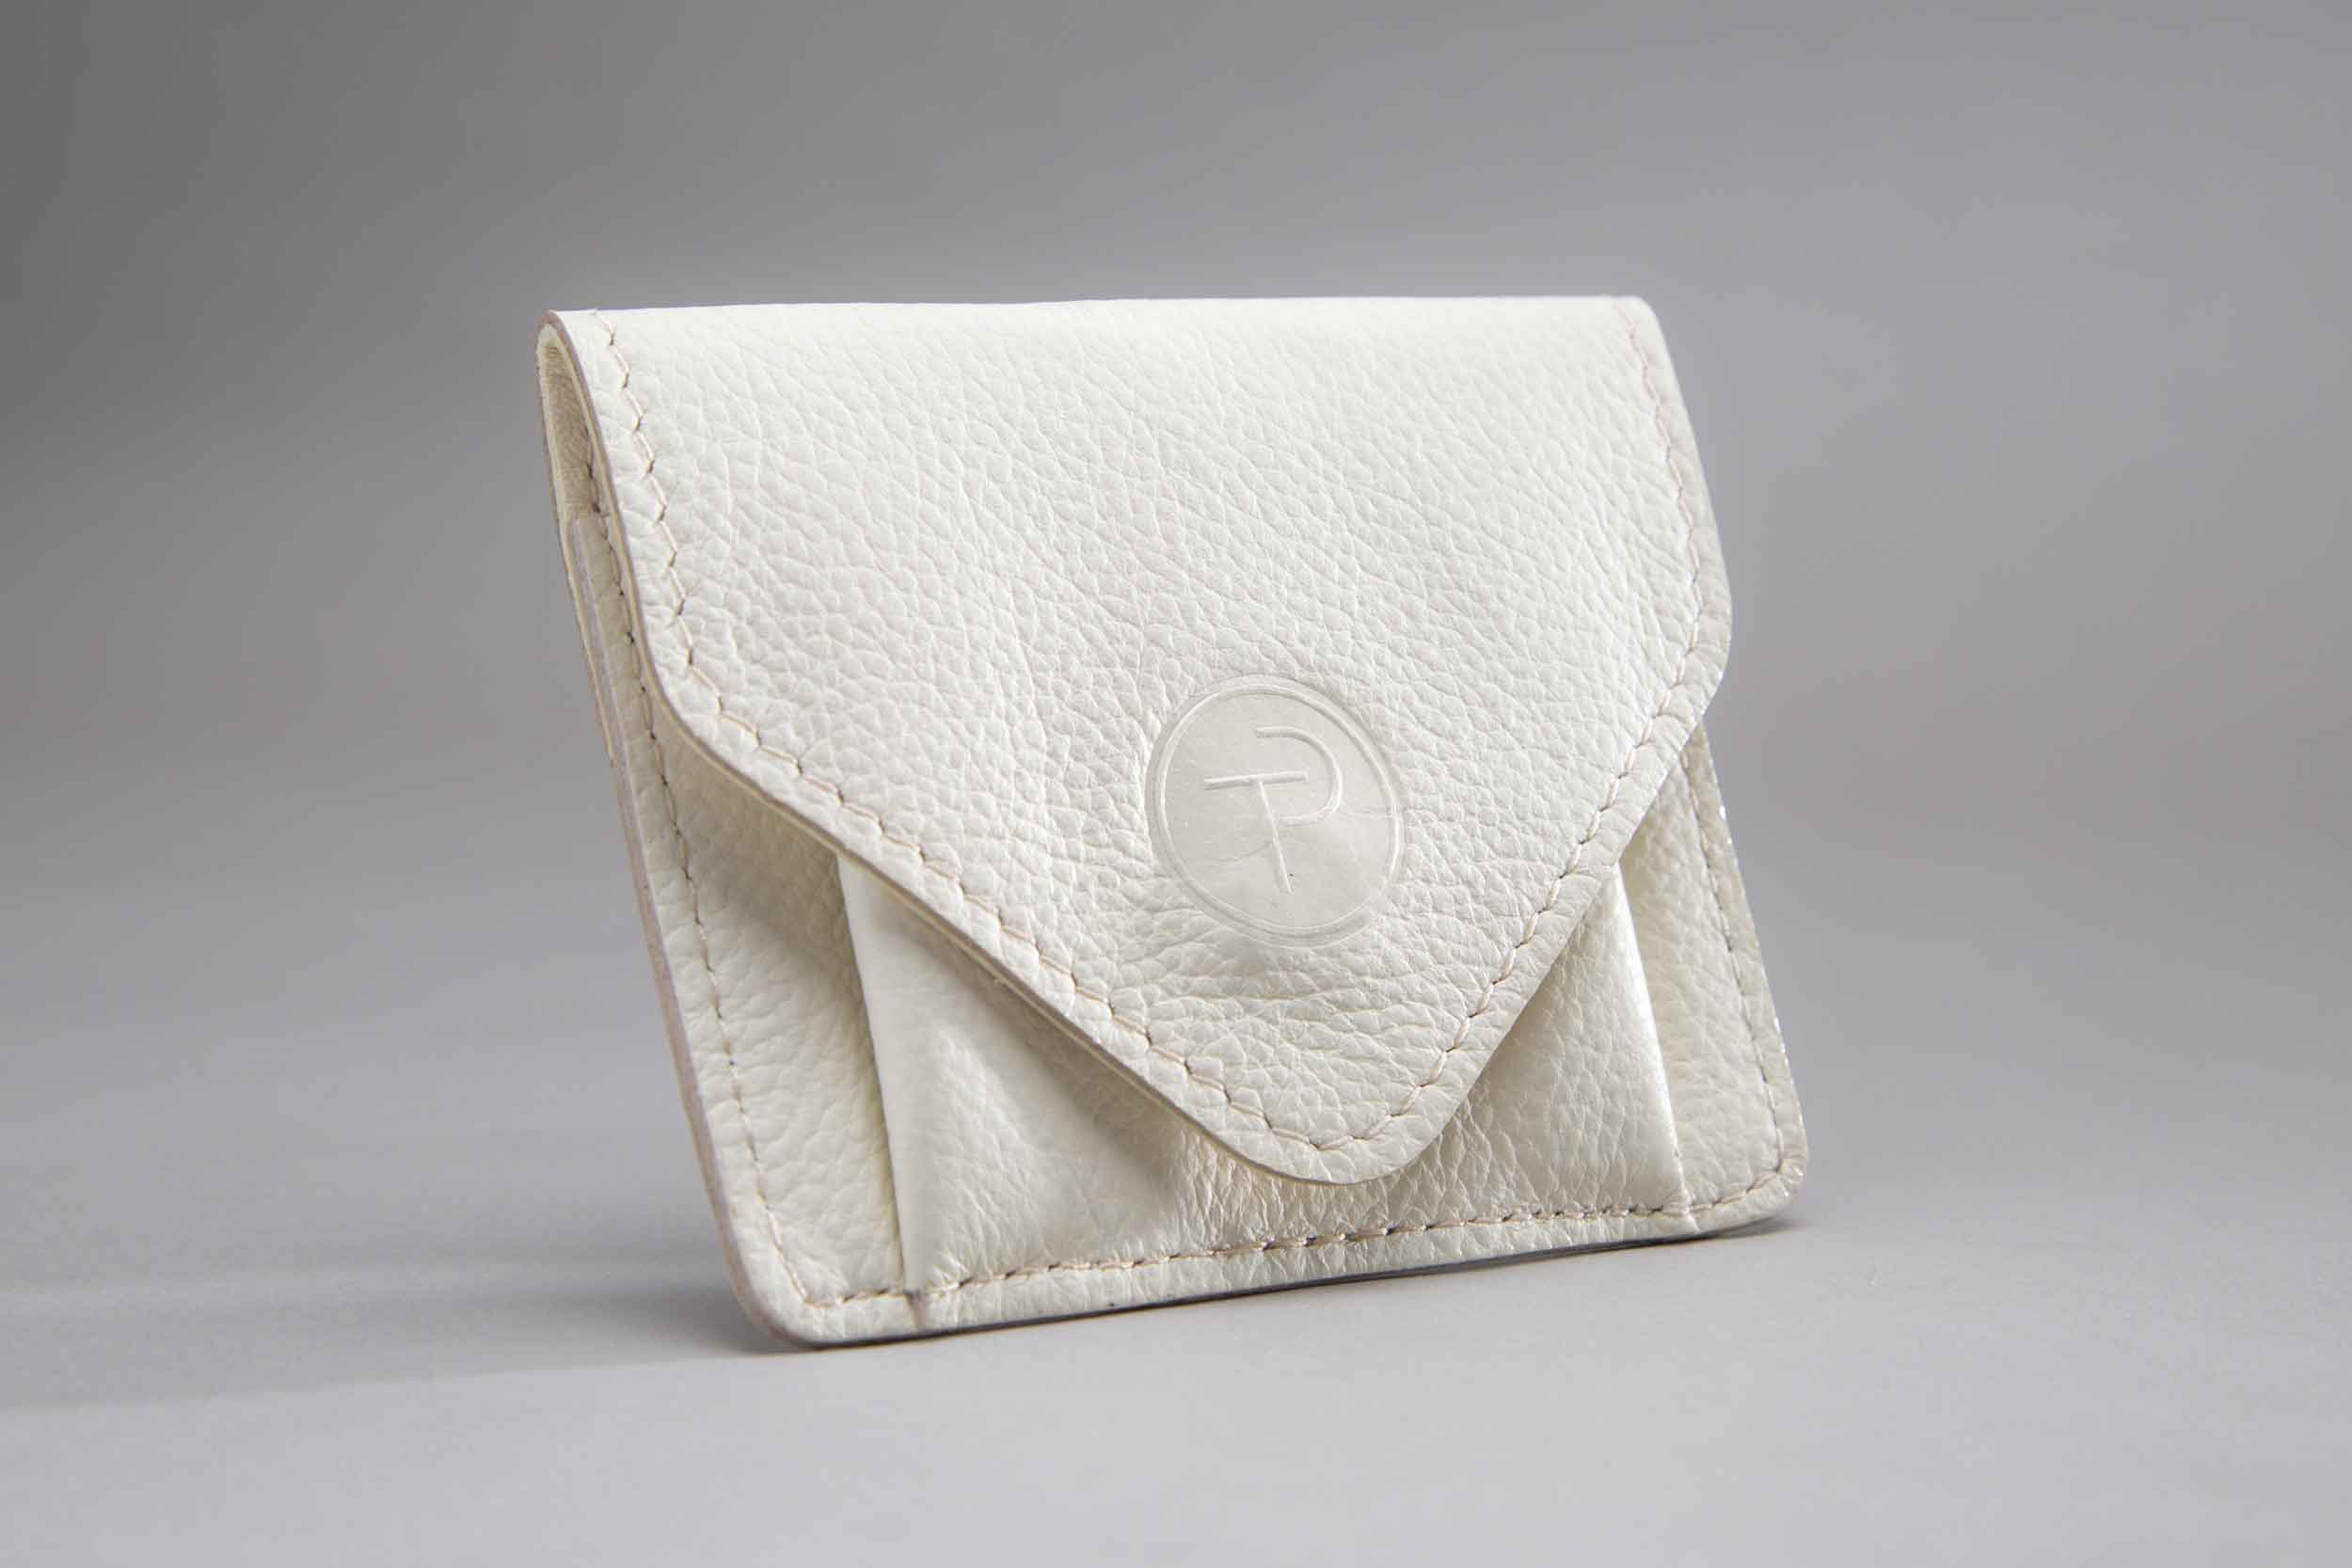 A leather pouch that holds the Thomas Pinck jewelry.